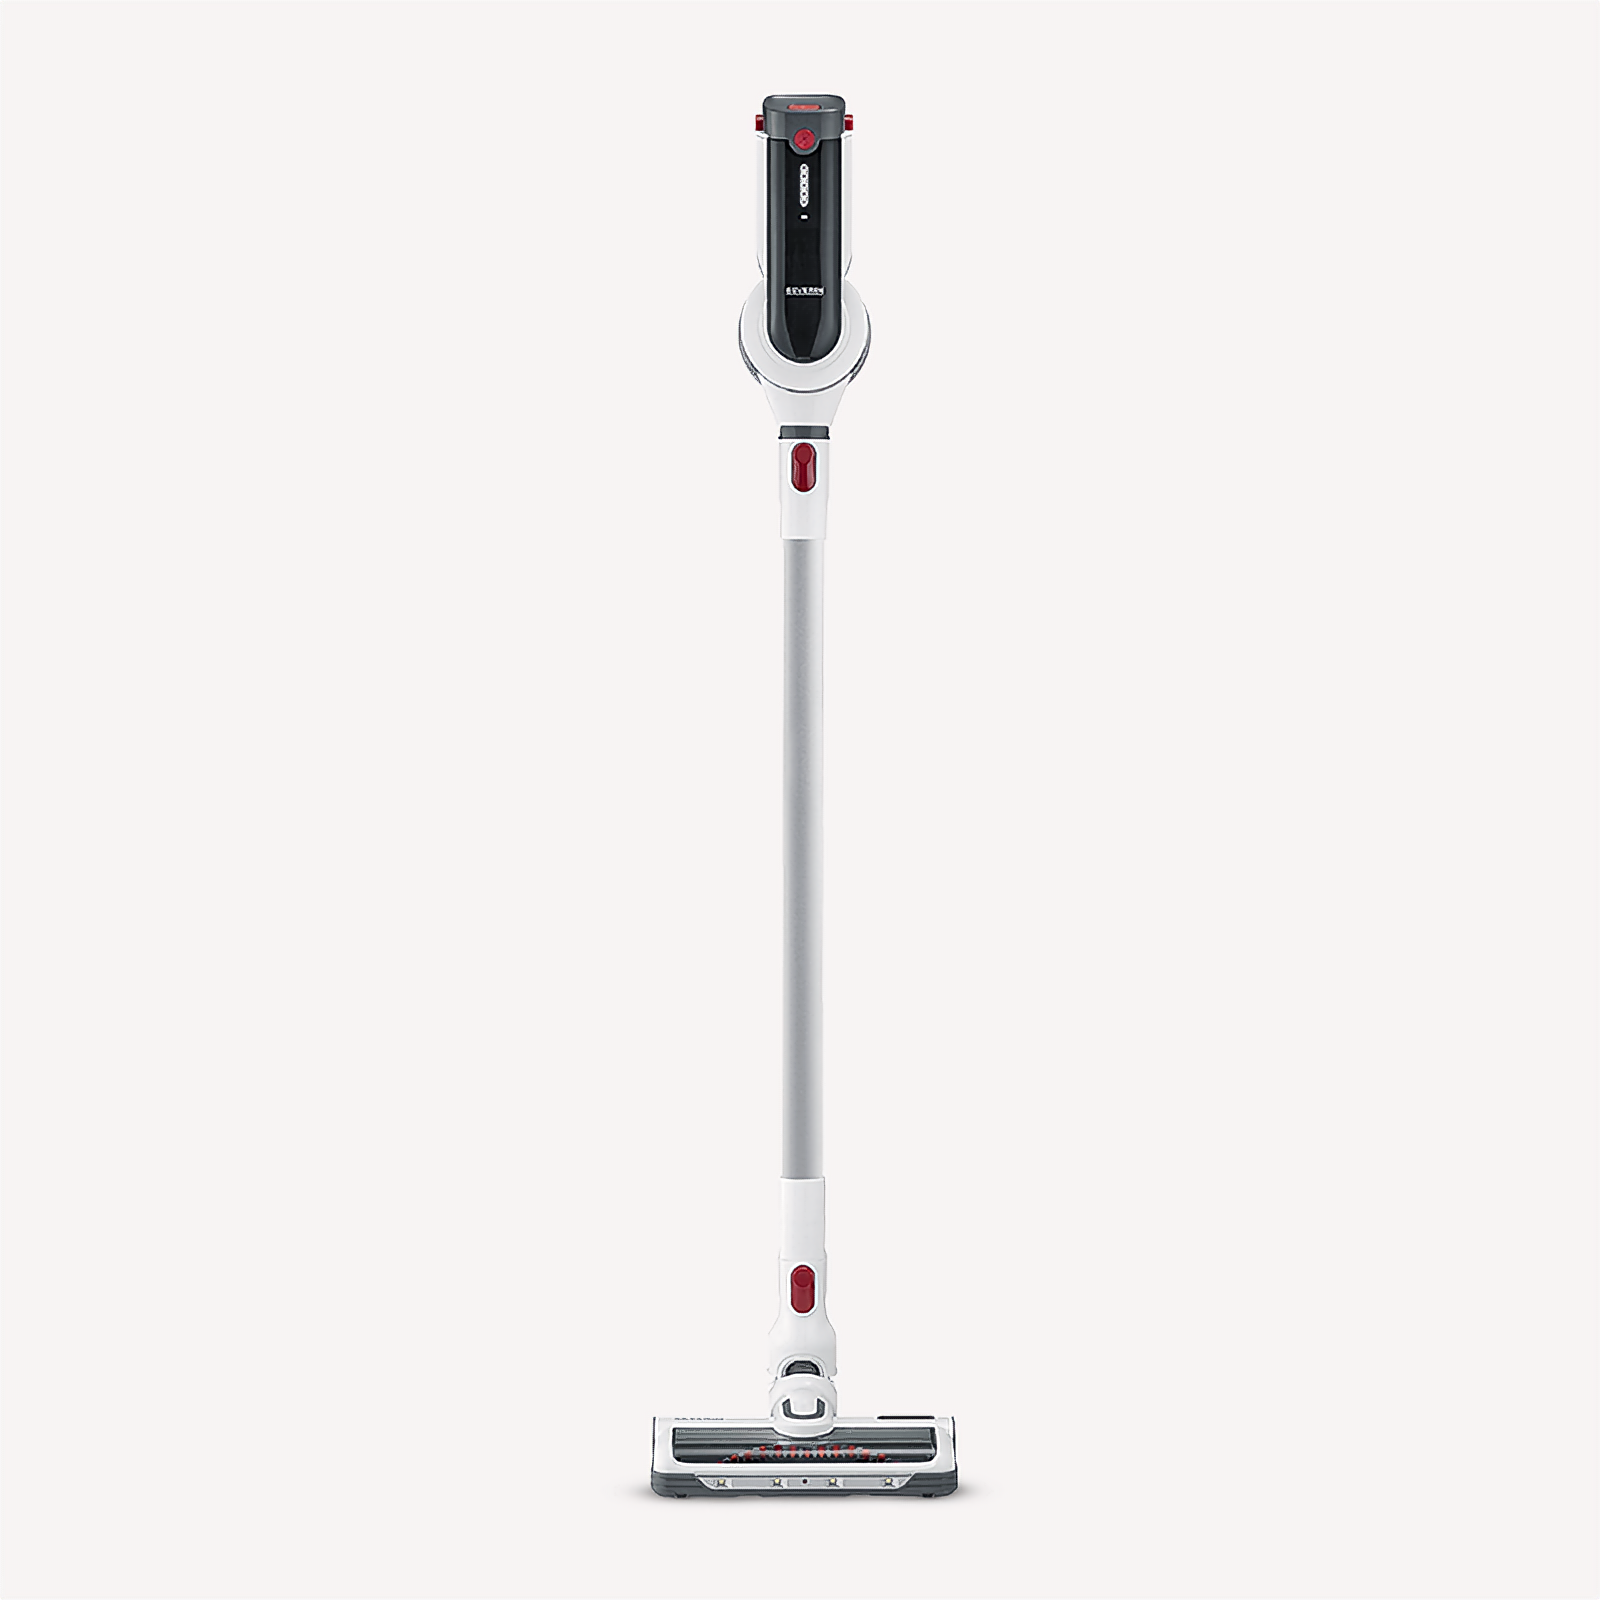 Cordless 2-in-1 hand cleaner and - vacuum 7166 SEVERIN (Official) stick HV